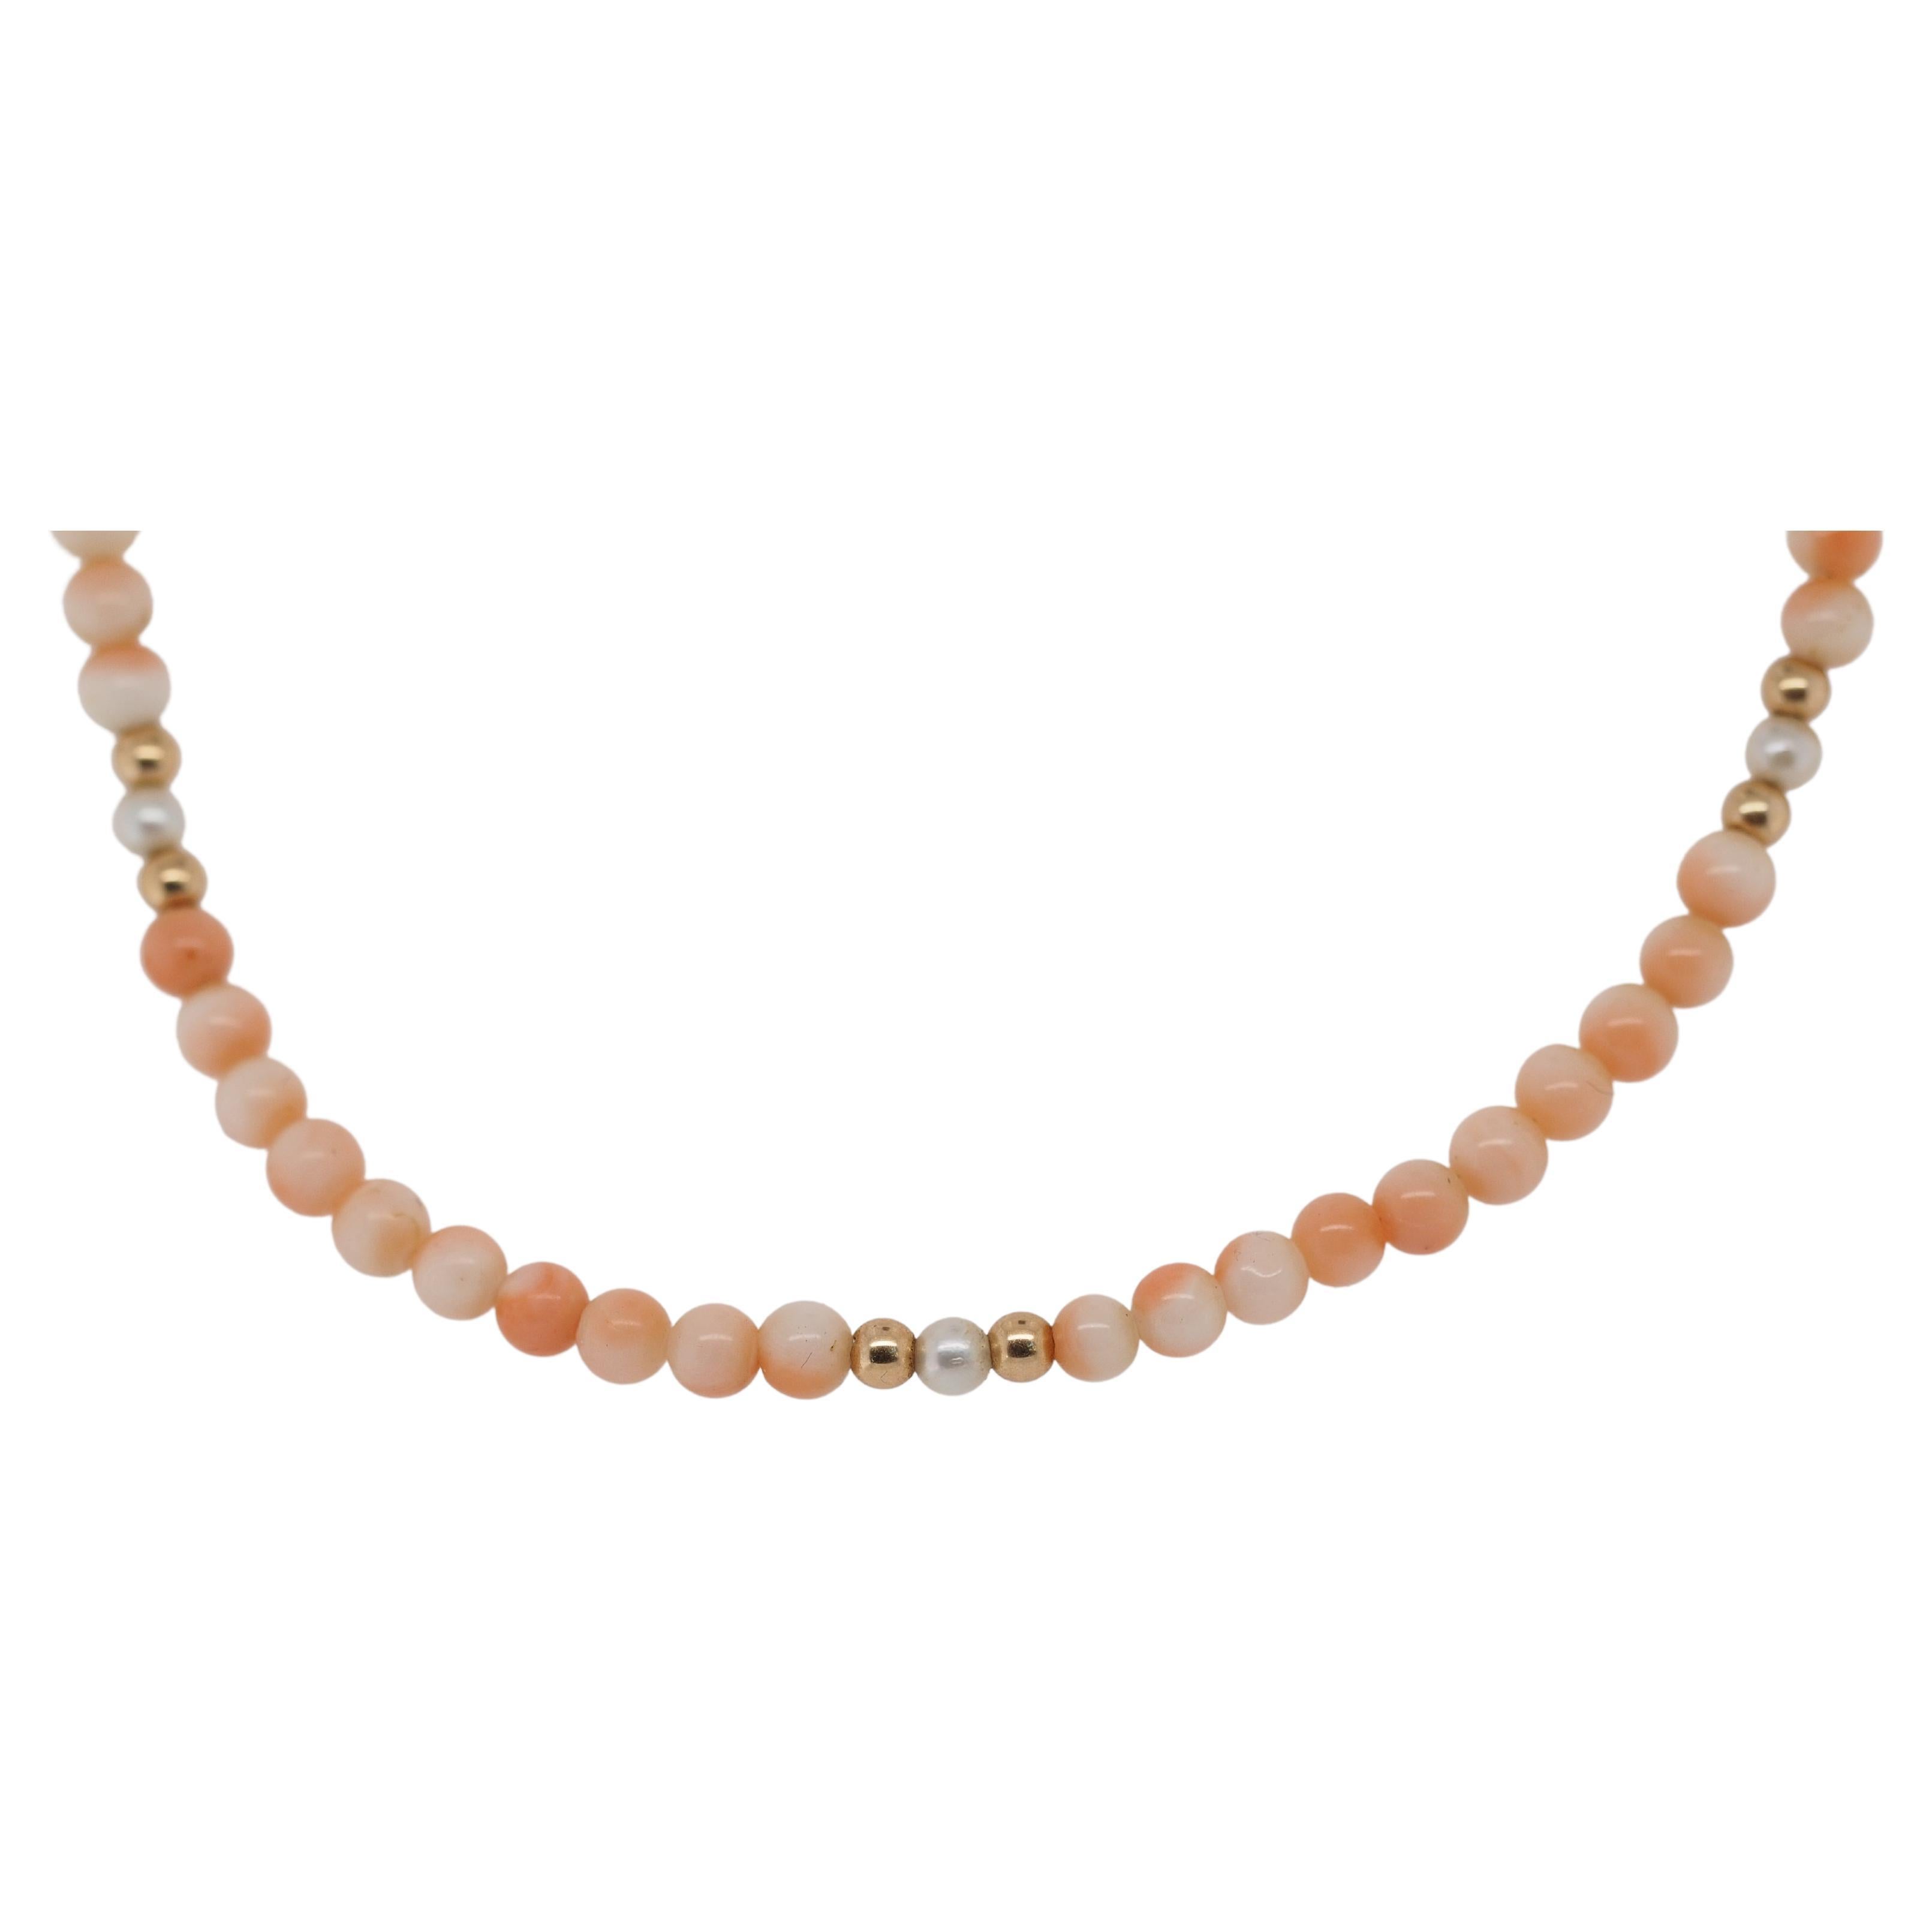 14k Yellow Gold Coral Bead Necklace with 14k Beads and Pearls For Sale